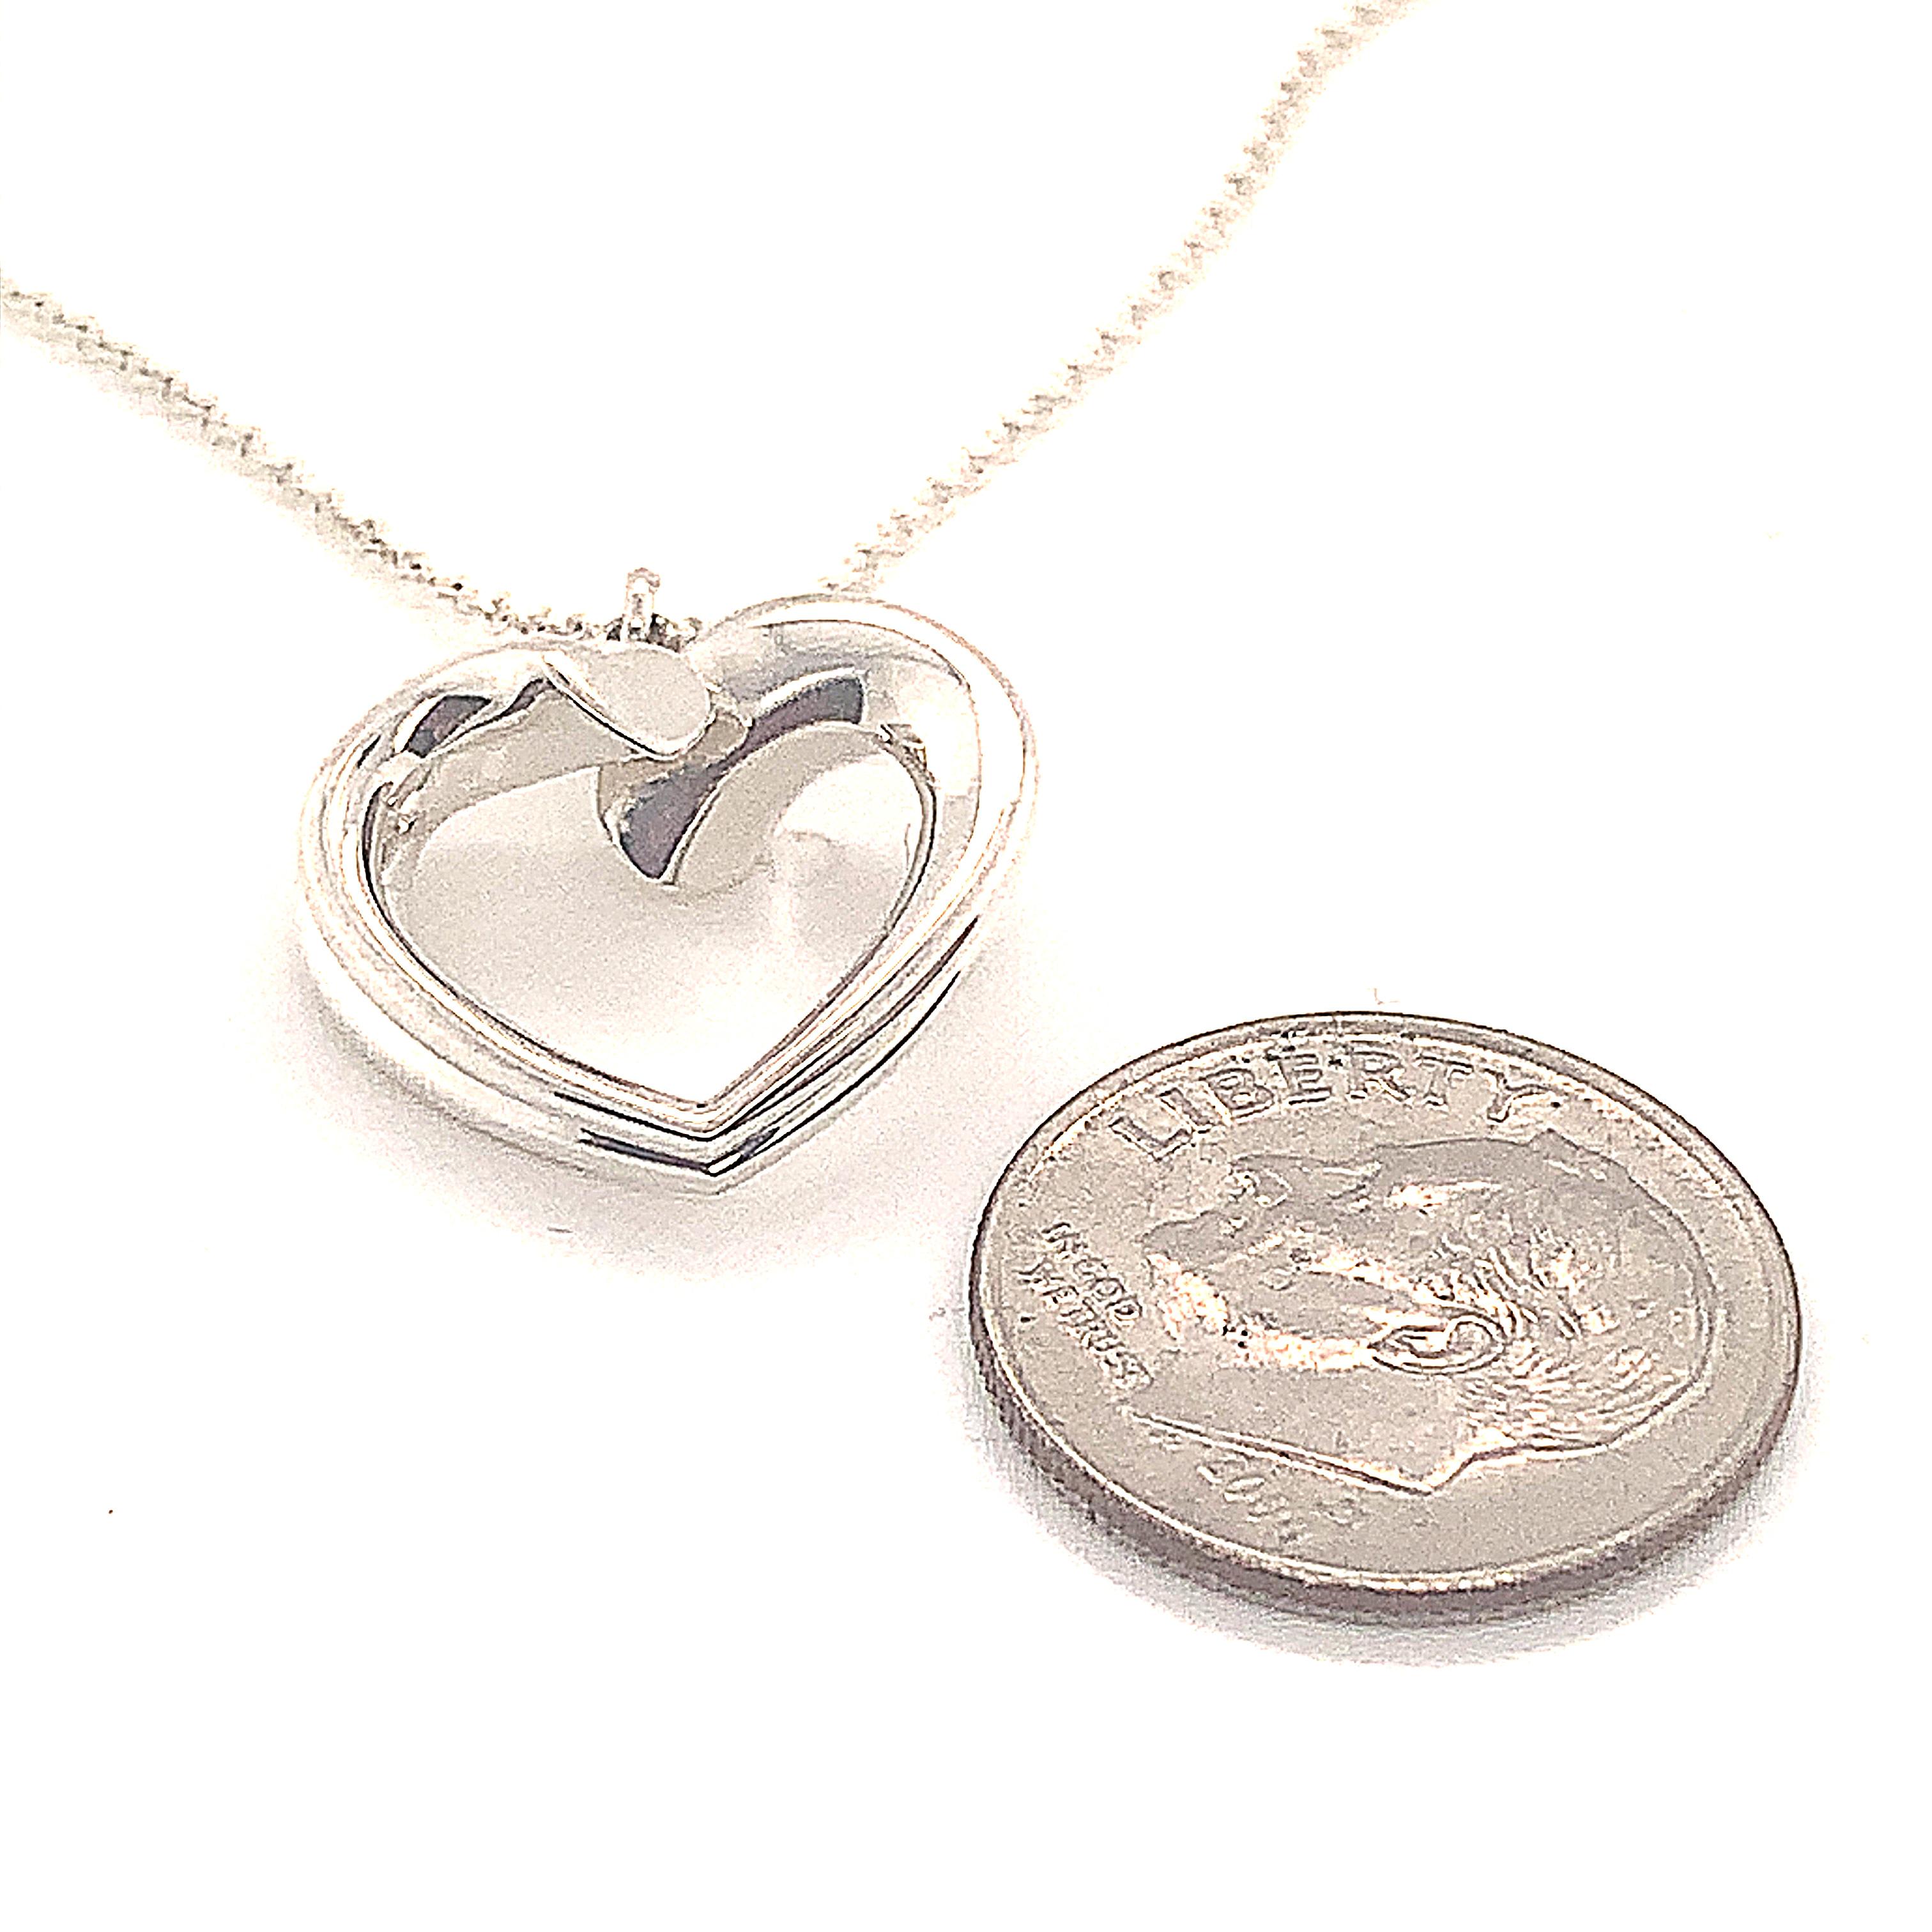 Tiffany & Co Sterling Silver Heart Necklace 16 Inches 4.4 Grams TIF110
 
This elegant Authentic Tiffany & Co necklace is made of sterling silver and has a weight of 4.4 grams.

TRUSTED SELLER SINCE 2002
 
PLEASE SEE OUR HUNDREDS OF POSITIVE